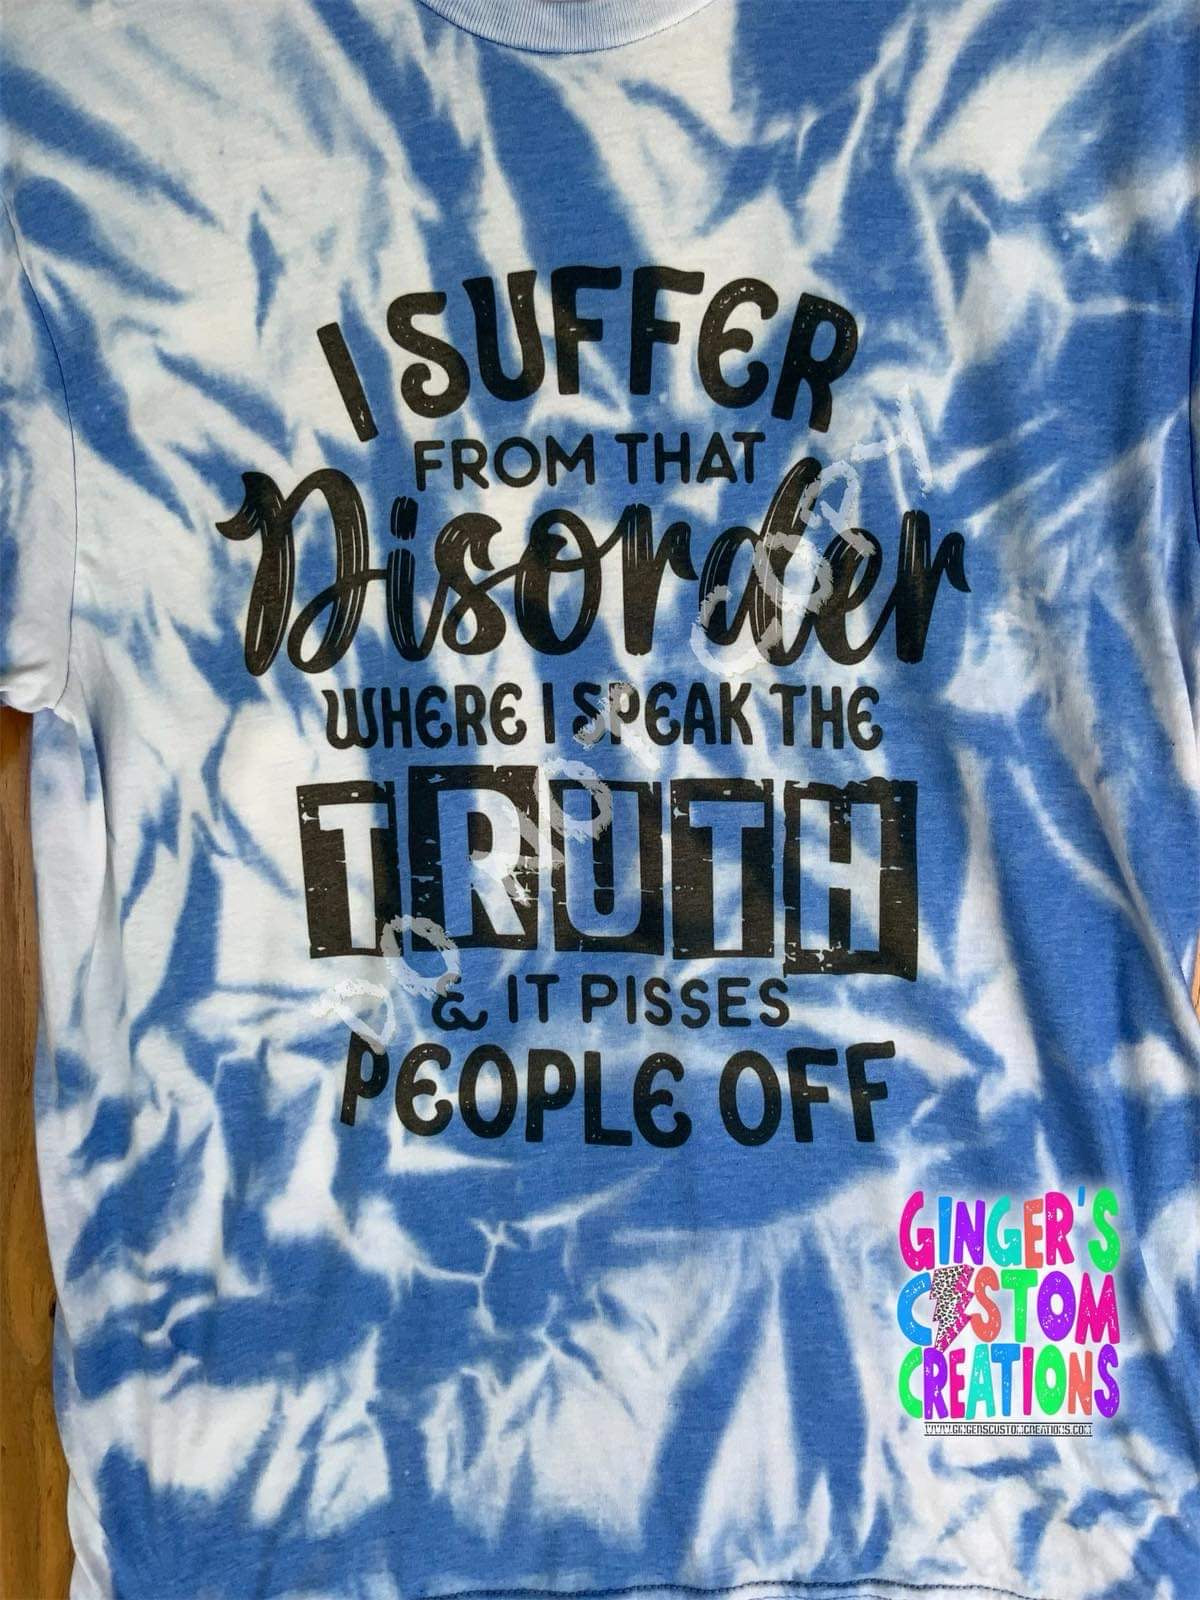 I suffer from that disorder where I speak the truth and it pisses people off  - BLEACHED TSHIRT